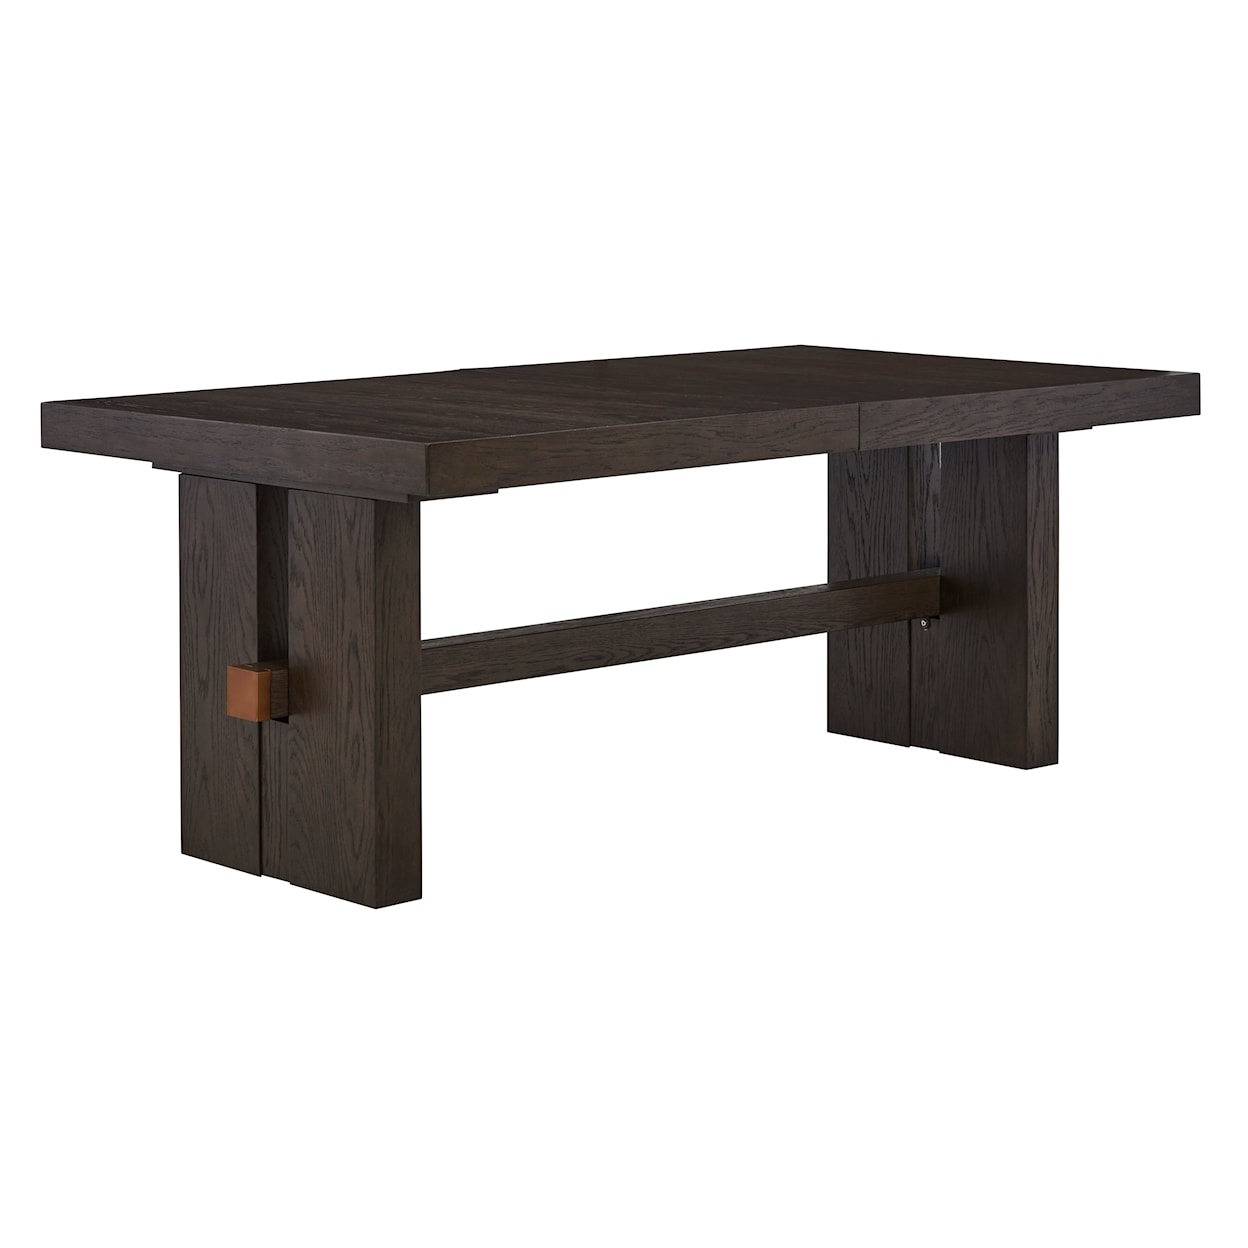 Belfort Select Everfield Dining Extension Table